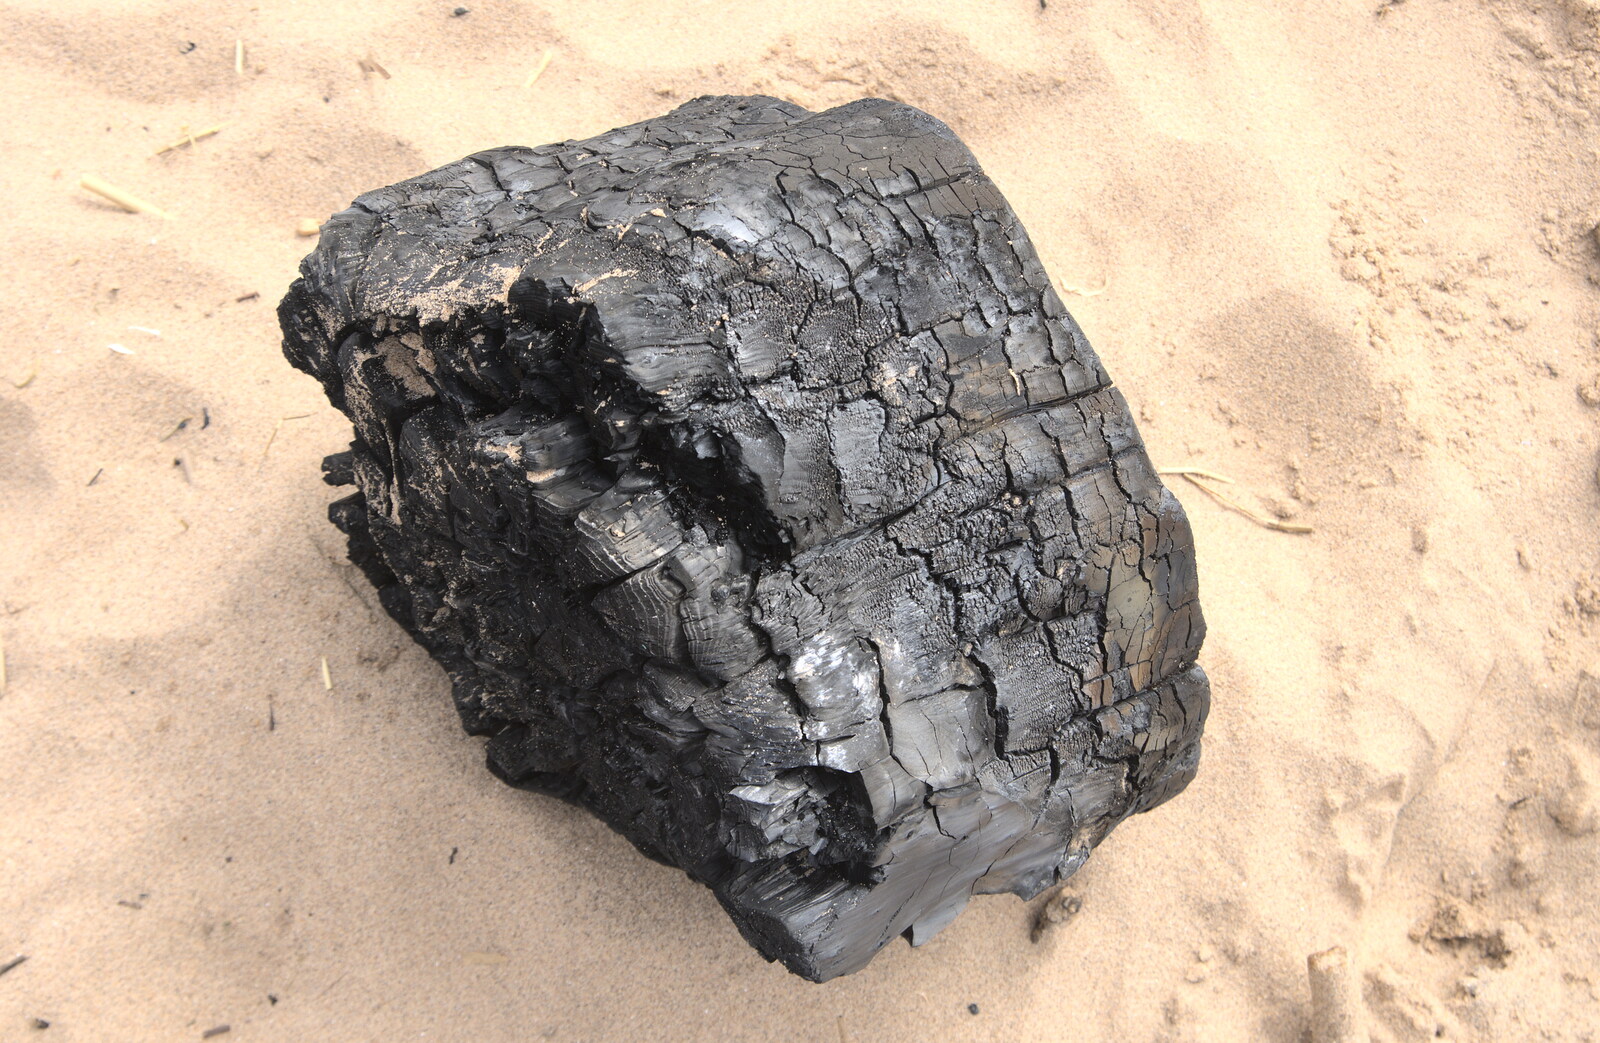 A bit of burnt wood on the beach from Grandma J's and a Day on the Beach, Spreyton and Exmouth, Devon - 13th April 2017